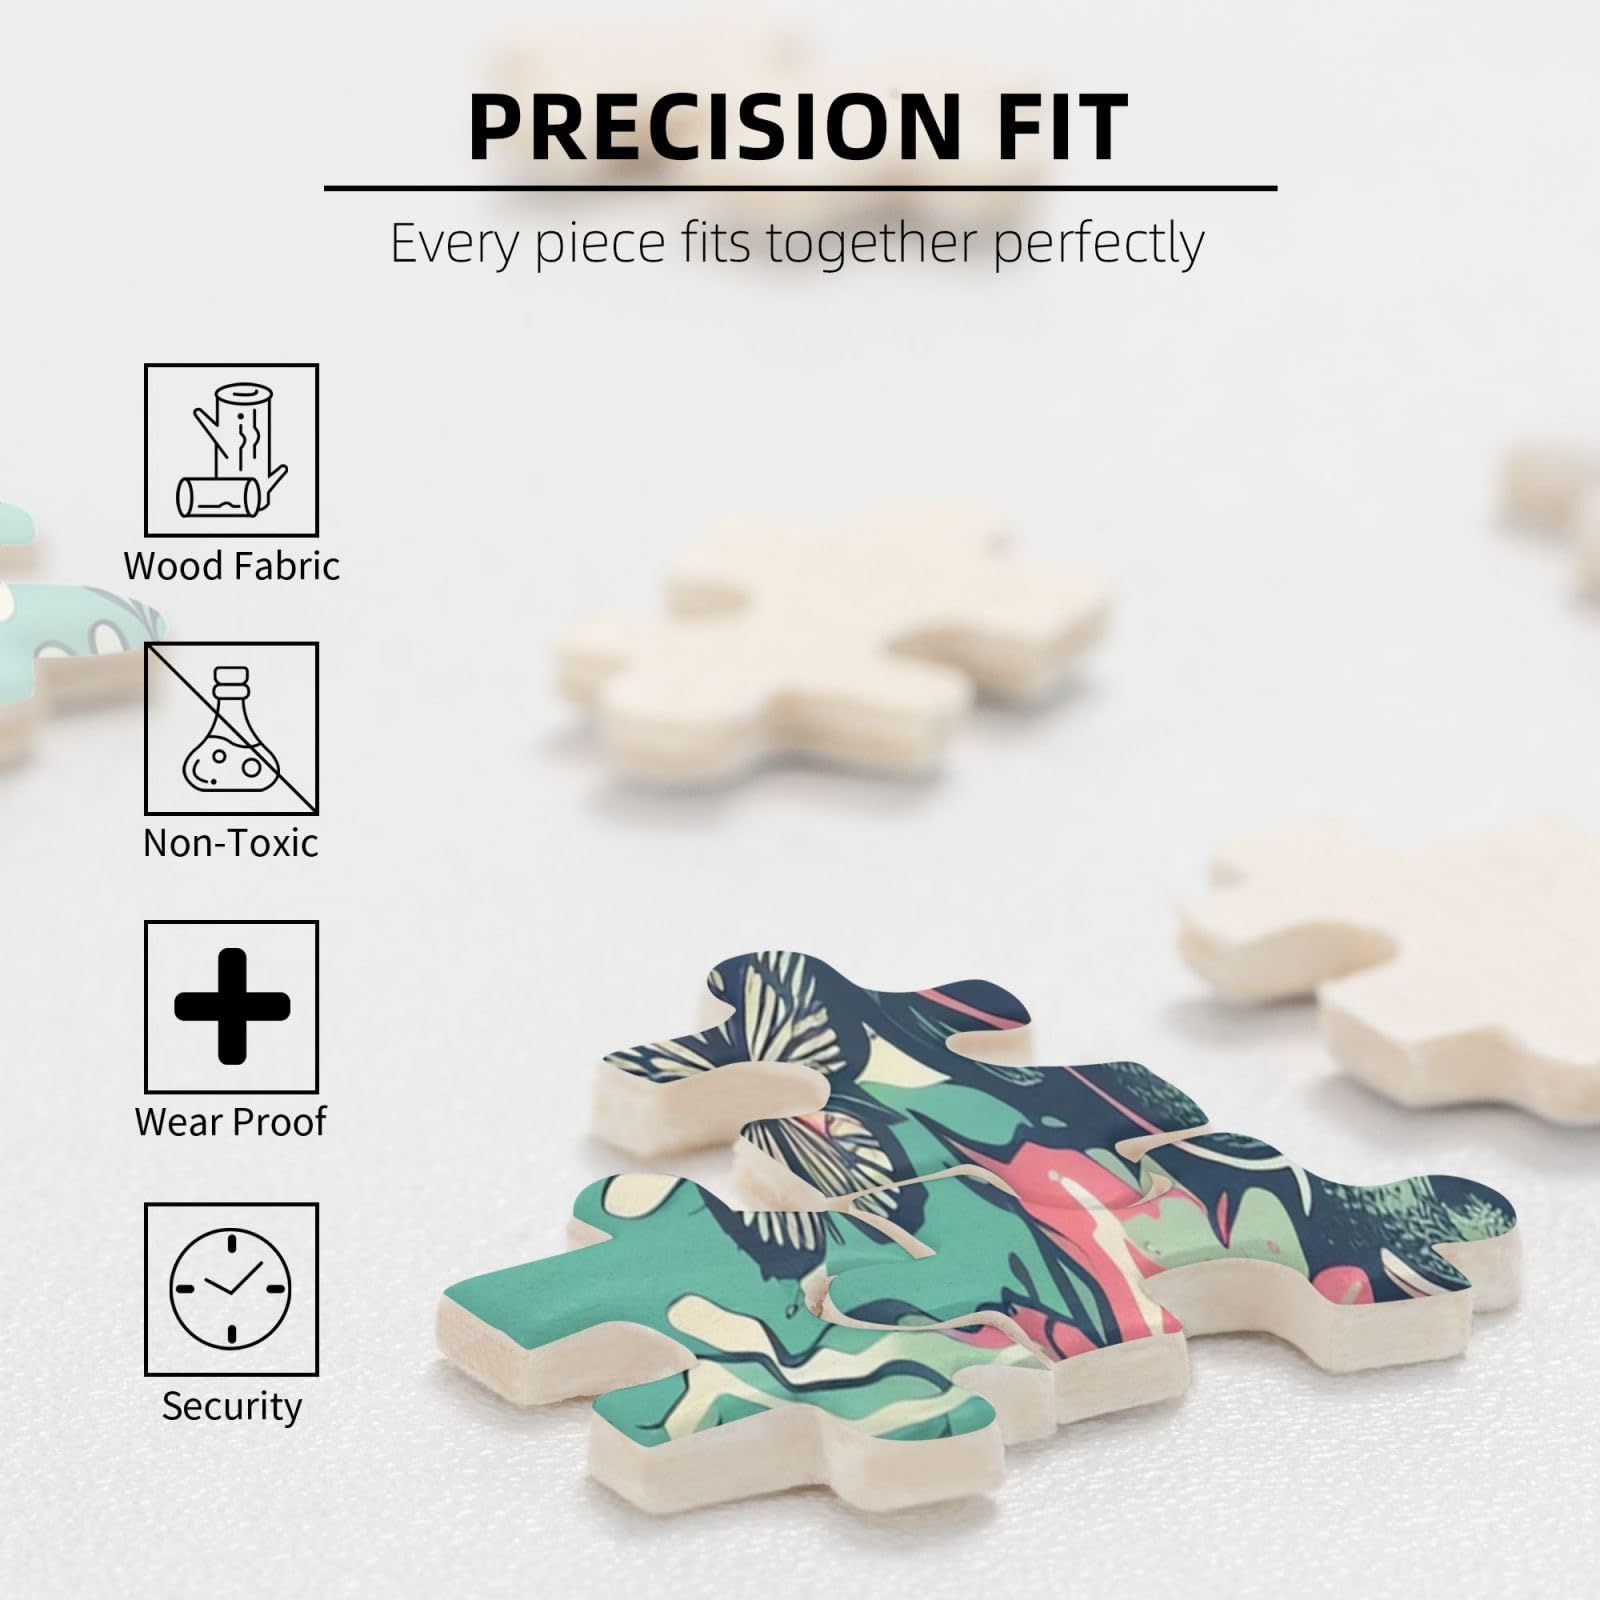 Ecological Pictures Print Puzzles Personalized Puzzle for Adults Wooden Picture Puzzle 1000 Piece Jigsaw Puzzle for Wedding Gift Mother Day